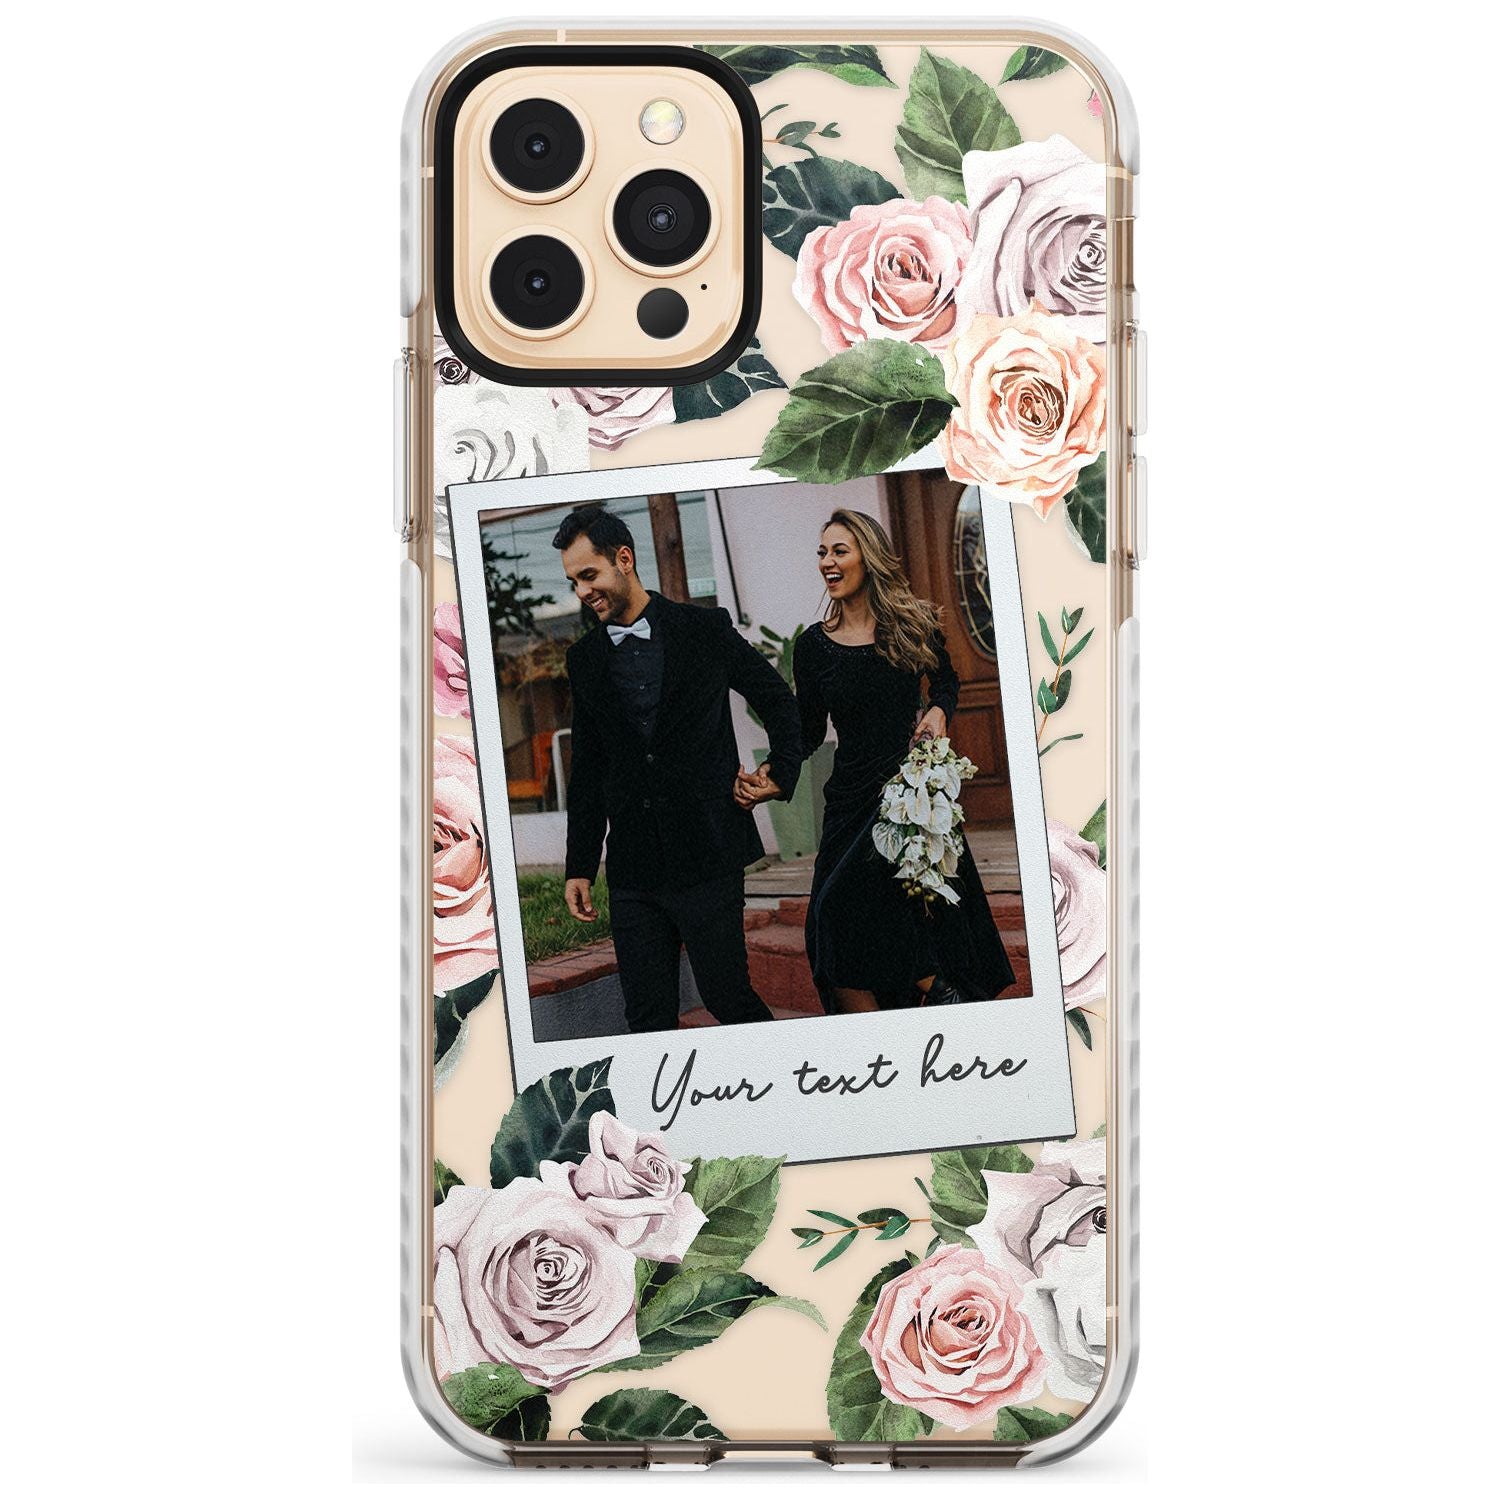 Floral Instant Film Slim TPU Phone Case for iPhone 11 Pro Max